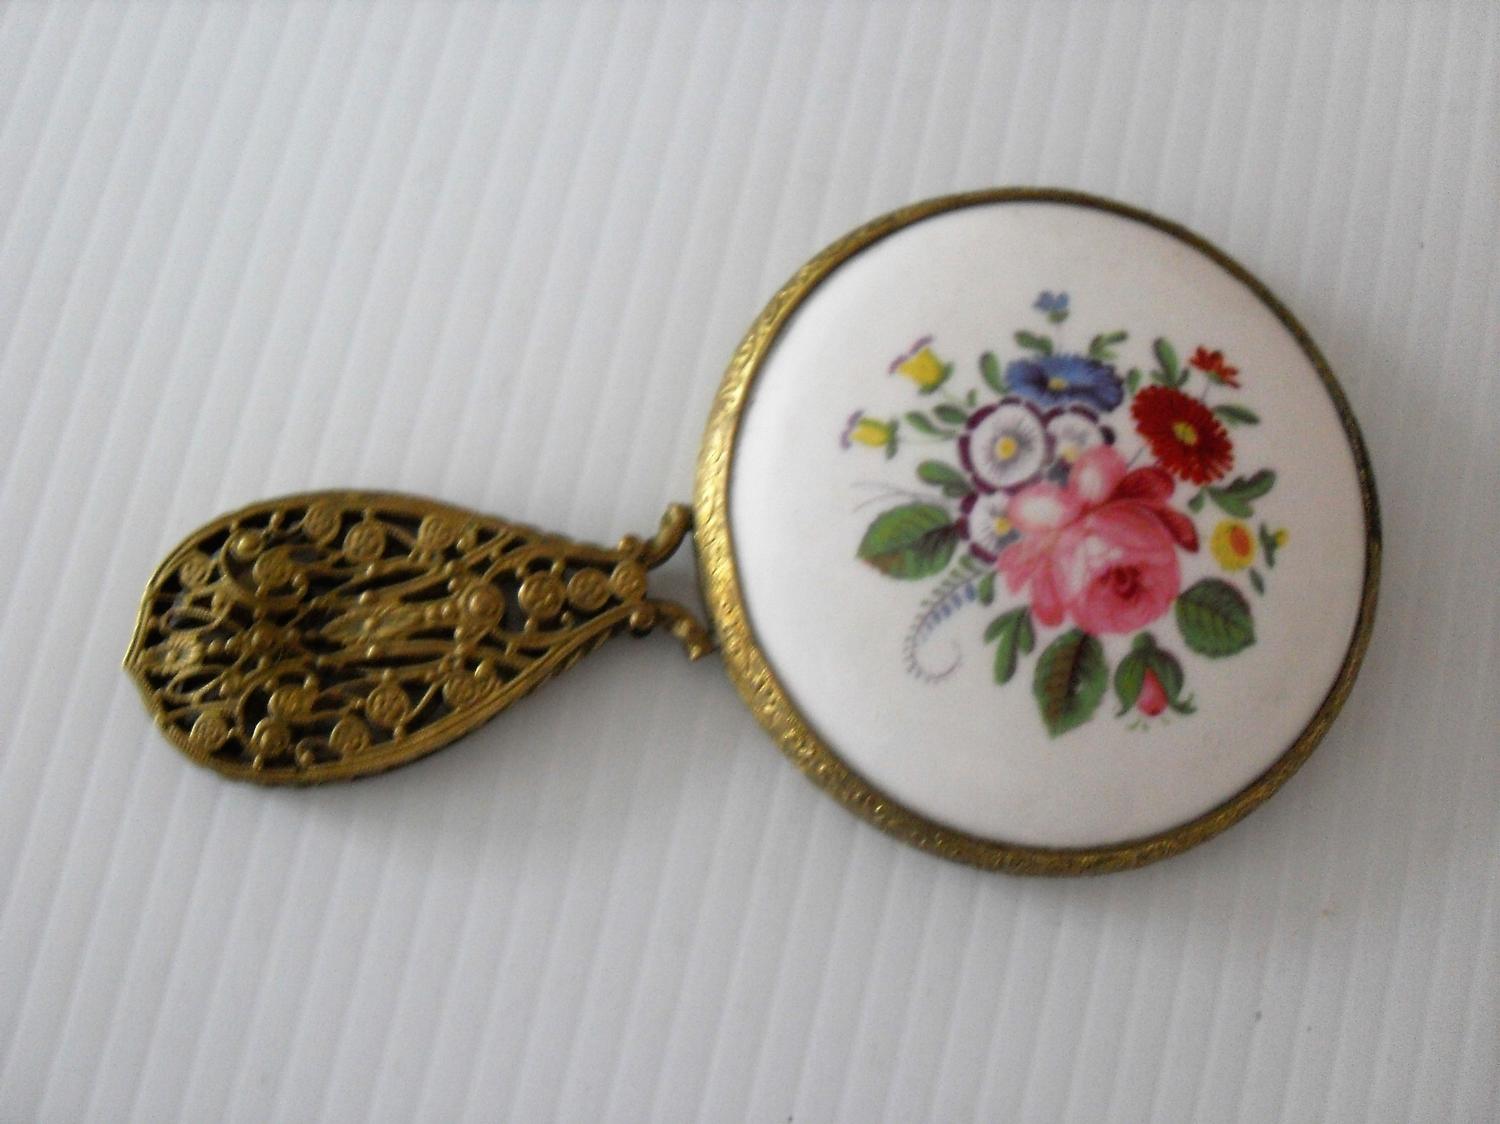 Three various glass scent bottles and a small hand mirror with painted floral decoration, 10 - 12 cm - Image 2 of 2